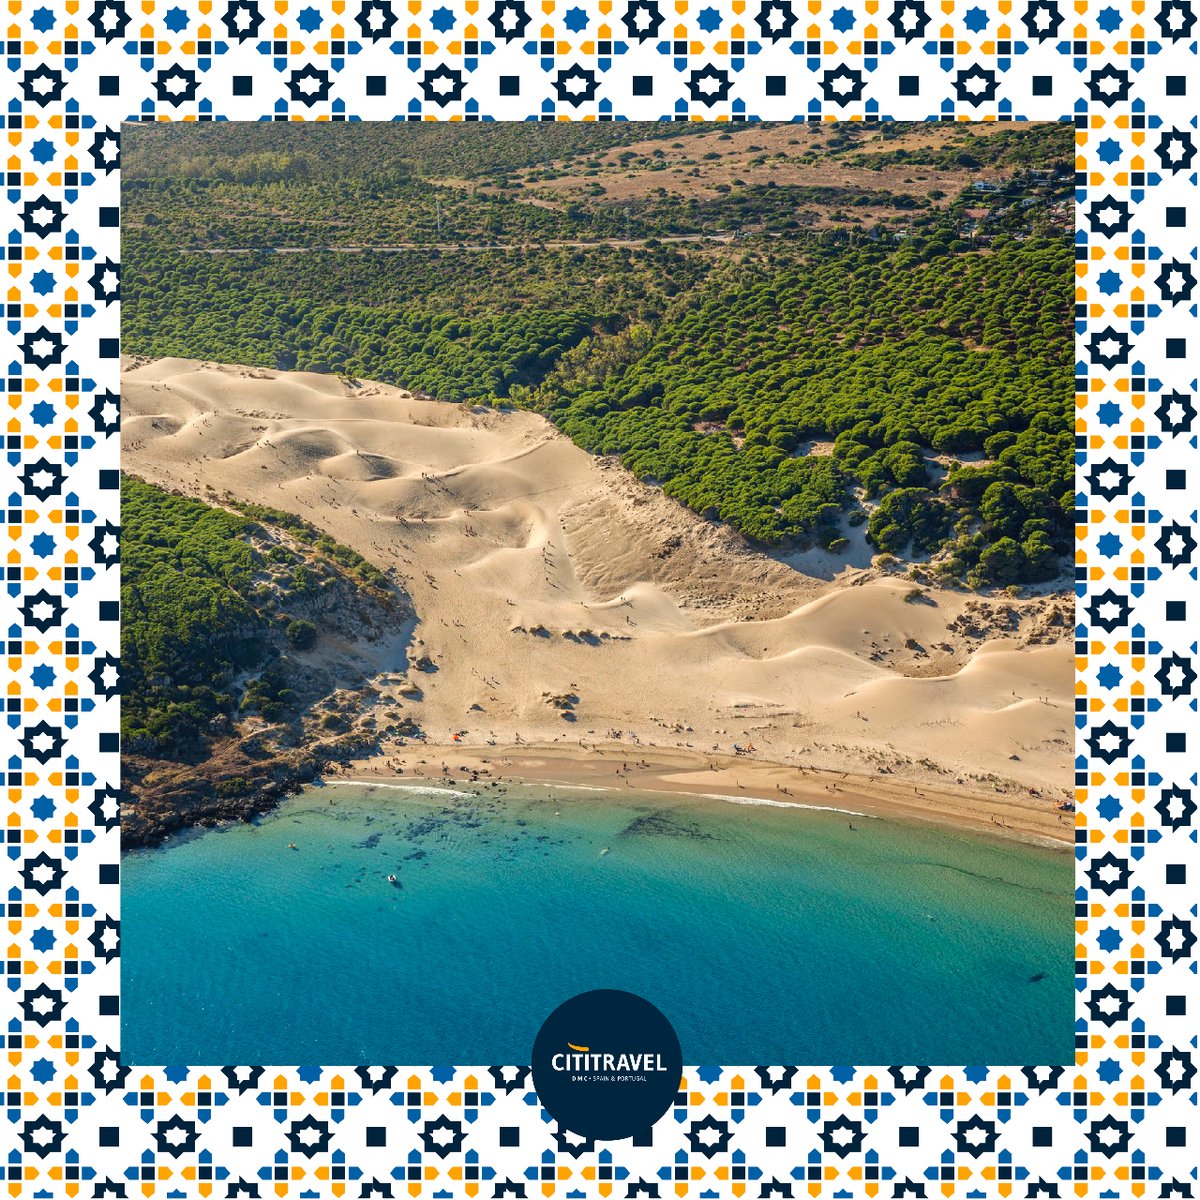 👋 Say goodbye to routine, and say hello to the fine sand, crystal-clear waters, and the imposing dune of Bolonia Beach. Lovers of outdoor activities such as kitesurfing, windsurfing, diving, and hiking: this destination is a must-visit!
✉️agp@cititravel.es
#dmcspain #dmcportugal